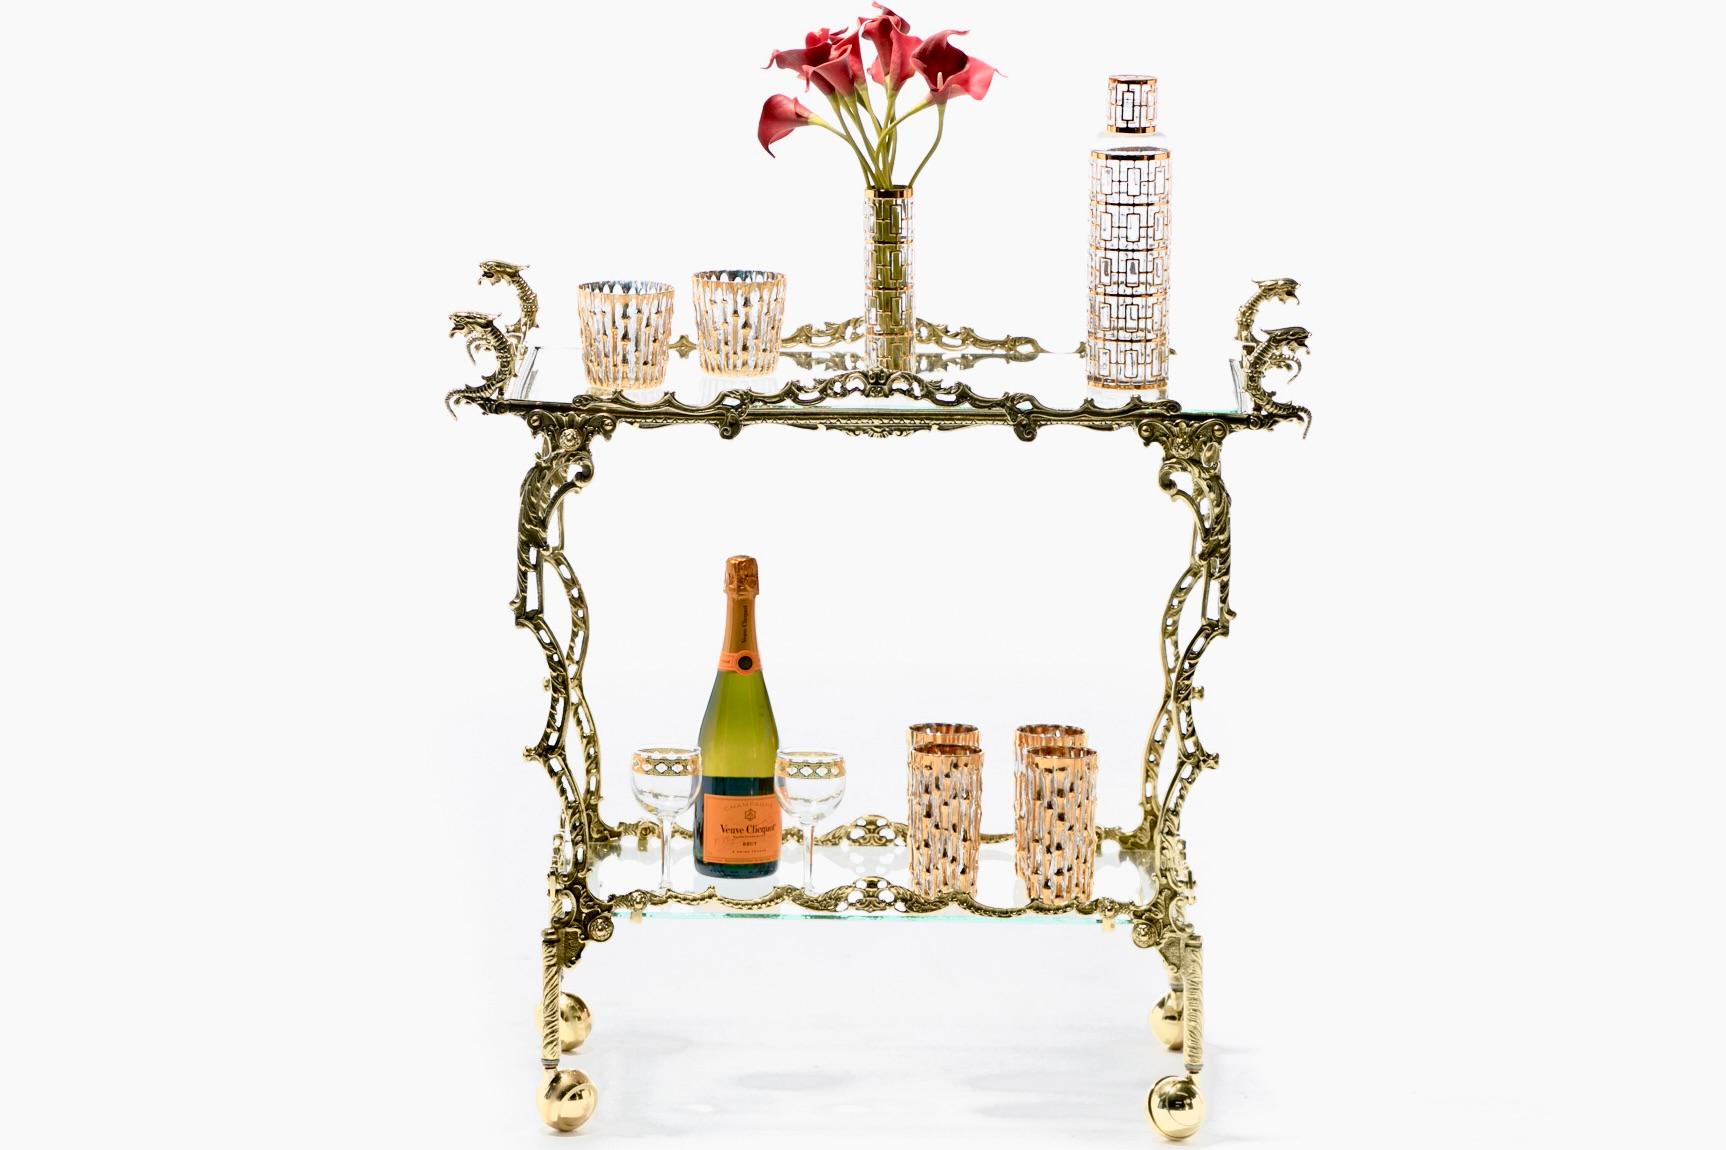 This chic bar cart is most certainly not the shy one in the room with an ornate dragon themed frame of golden brass that's attention grabbing without apology. Cast brass dragon heads dominate the silhouette like old money gargoyles. Frame is